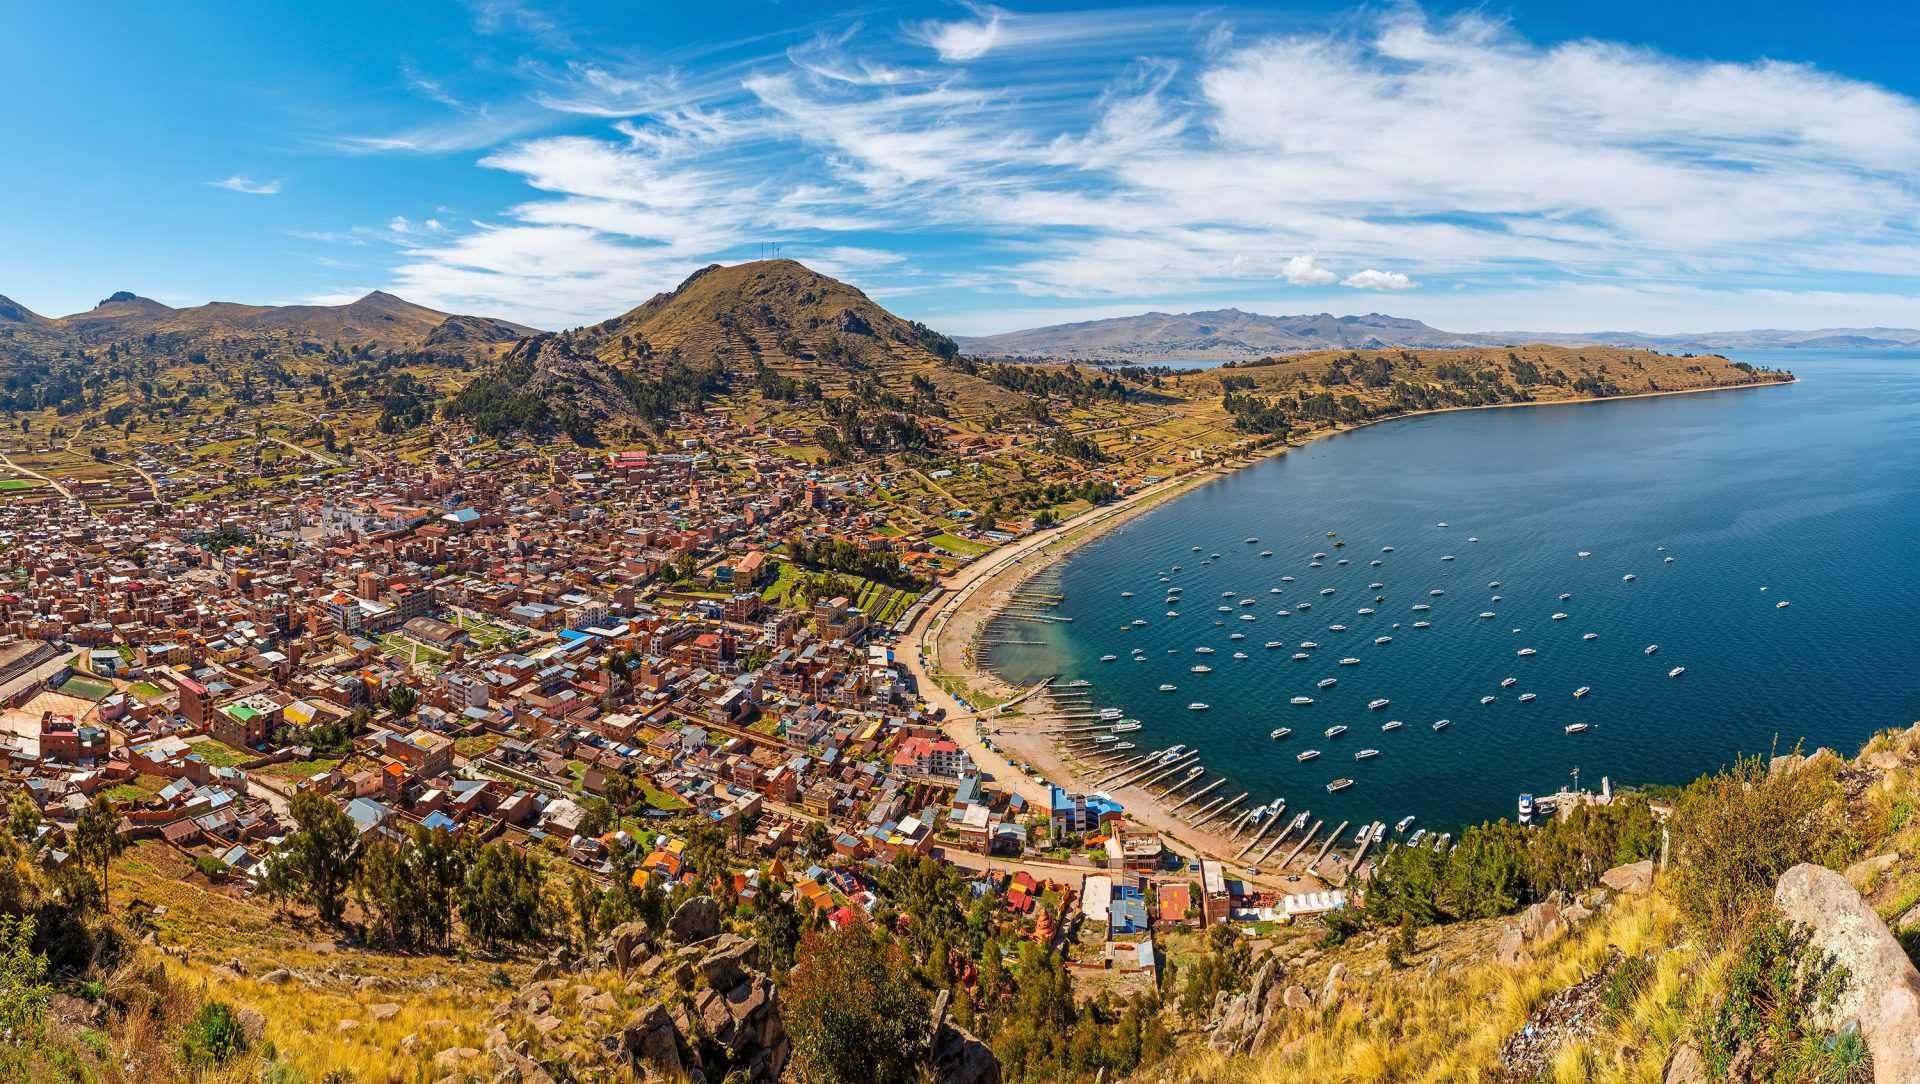 Panoramic image of magnificent lake Titicaca with houses lined up on the coast.